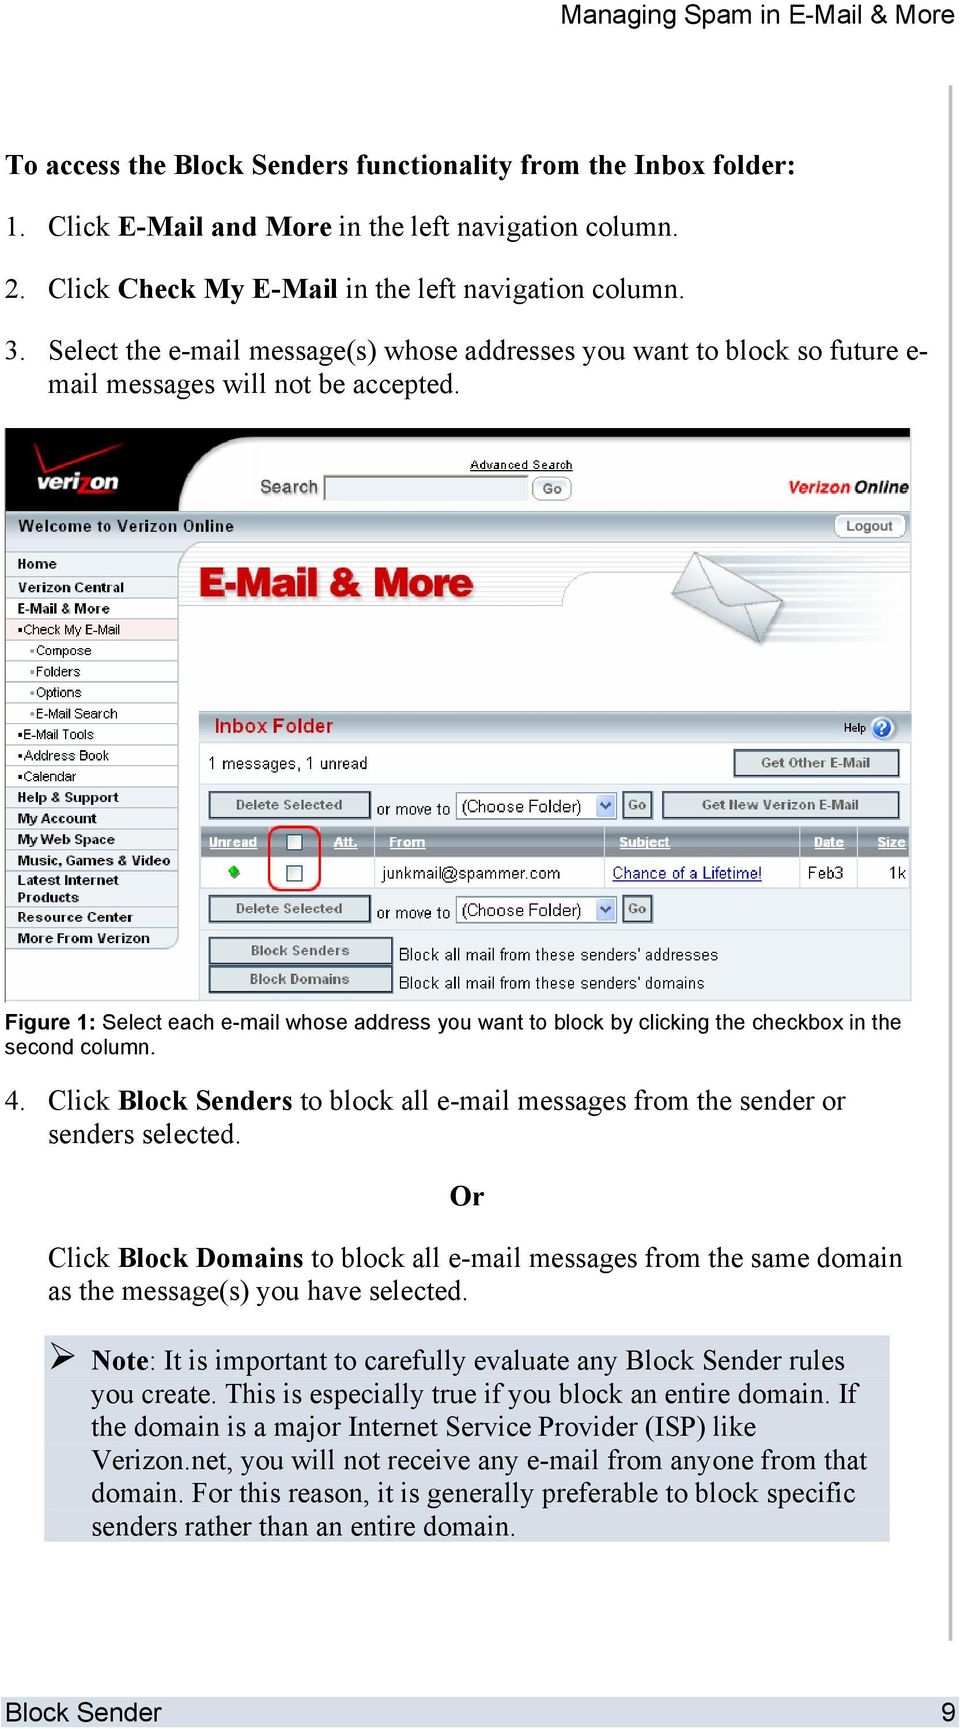 Figure 1: Select each e-mail whose address you want to block by clicking the checkbox in the second column. 4. Click Block Senders to block all e-mail messages from the sender or senders selected.